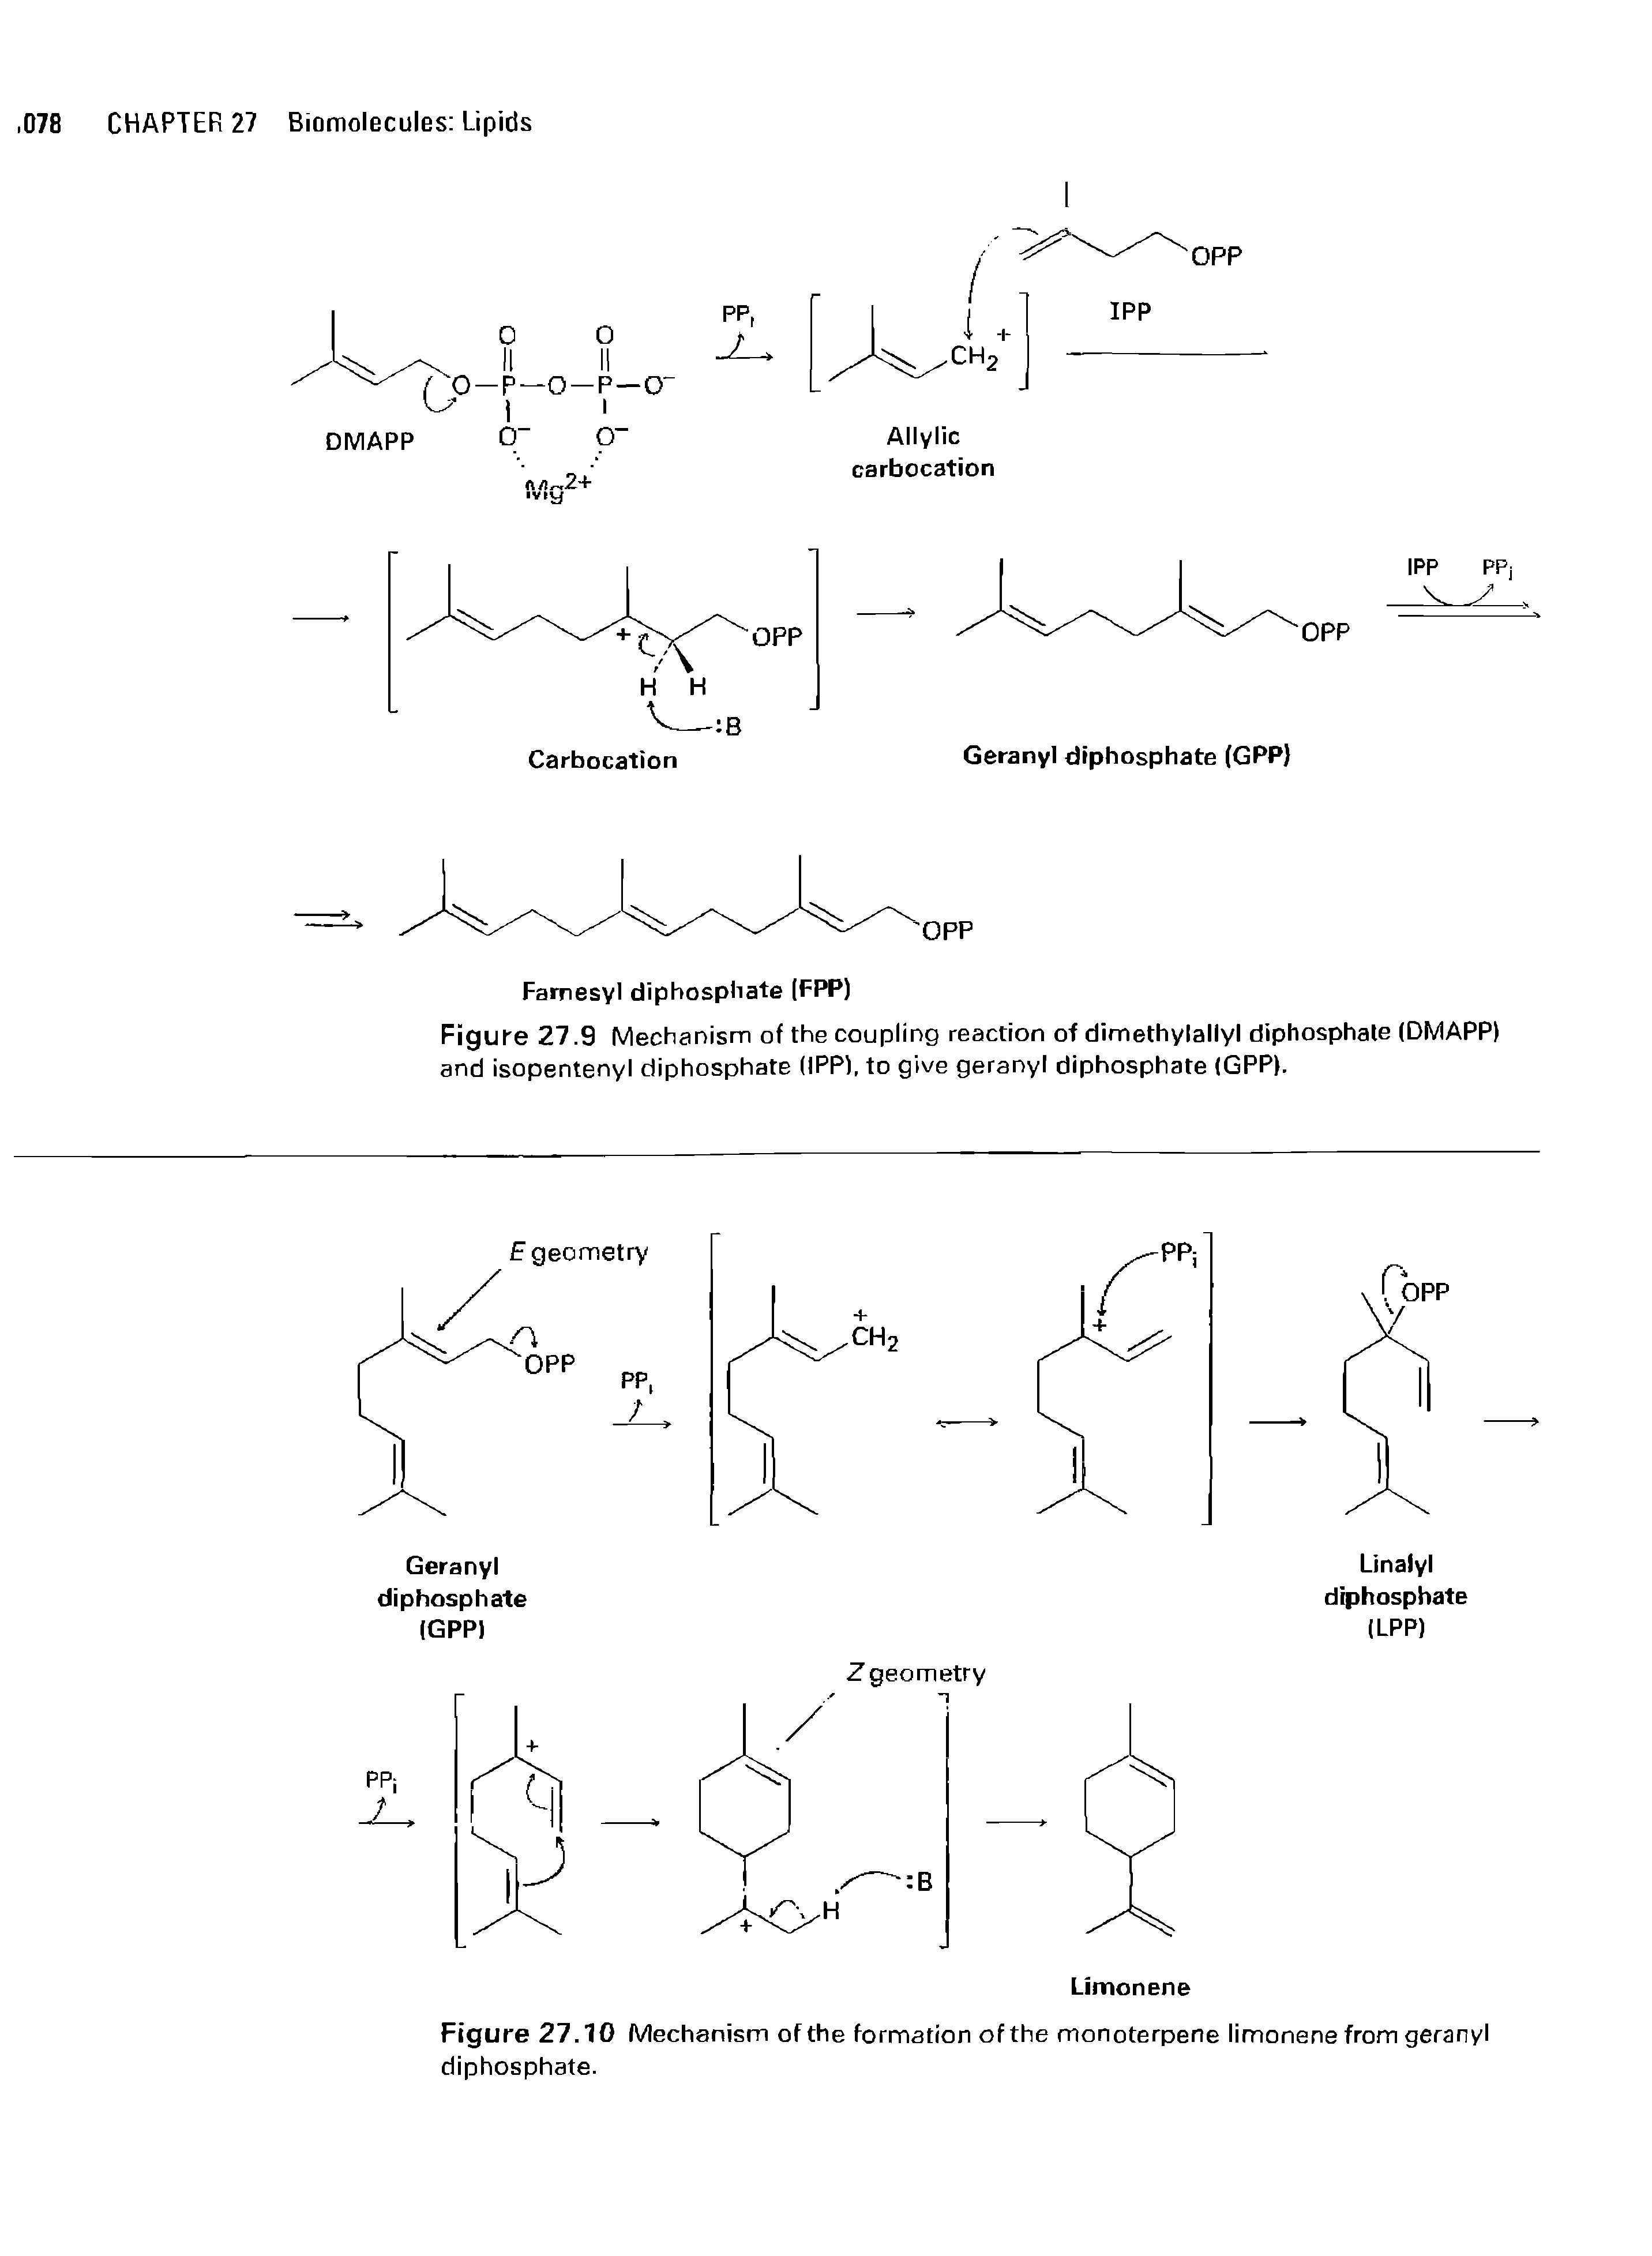 Figure 27.10 Mechanism of the formation of the monoterpene limonene from geranyl diphosphate.